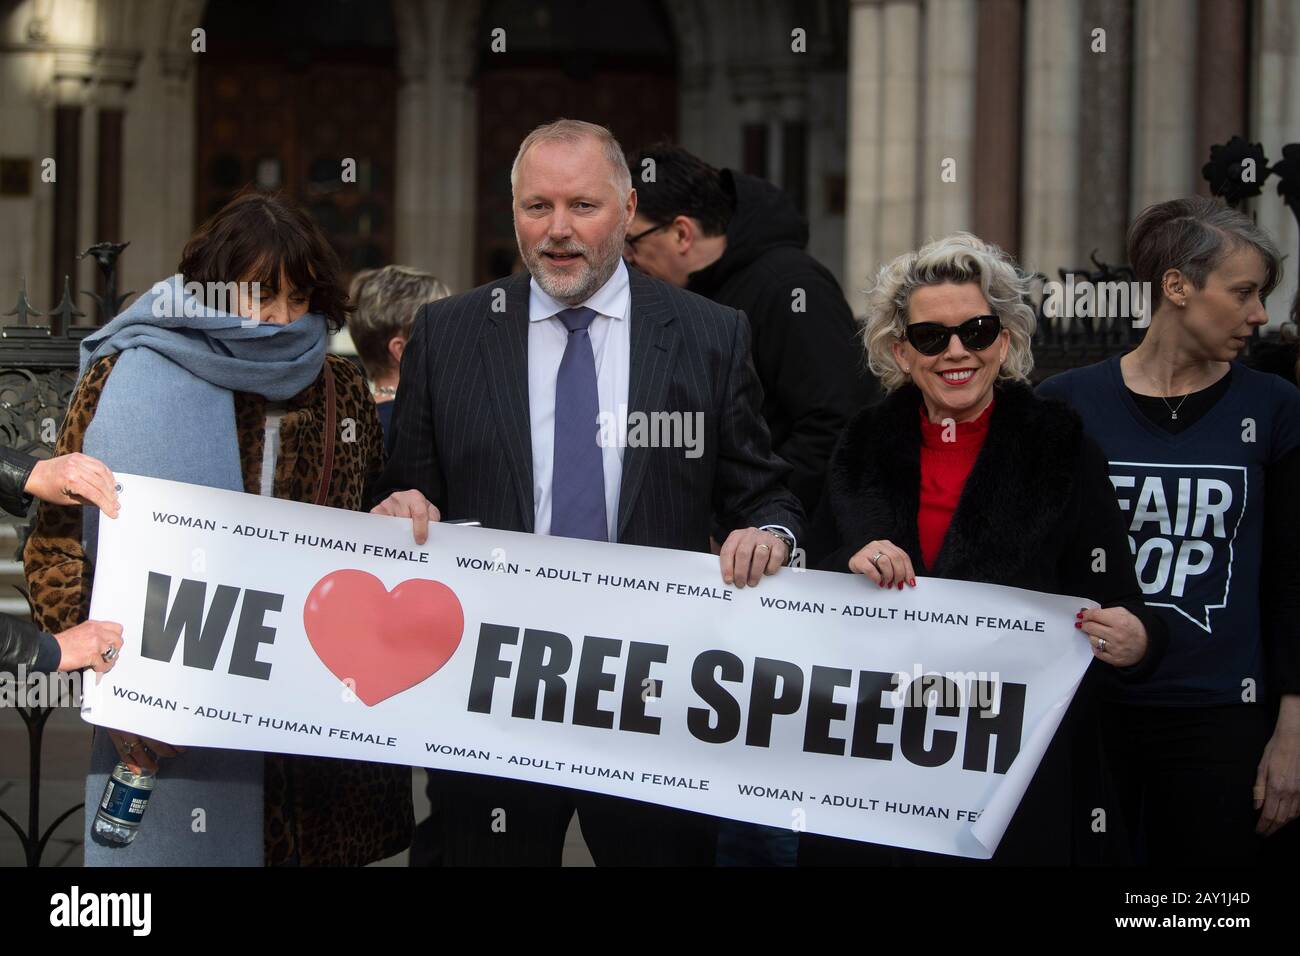 Former police officer Harry Miller with supporters outside the High Court, London, ahead of the ruling that his allegedly 'transphobic' tweets were lawful and Humberside Police's response interfered with his right to freedom of expression. Stock Photo